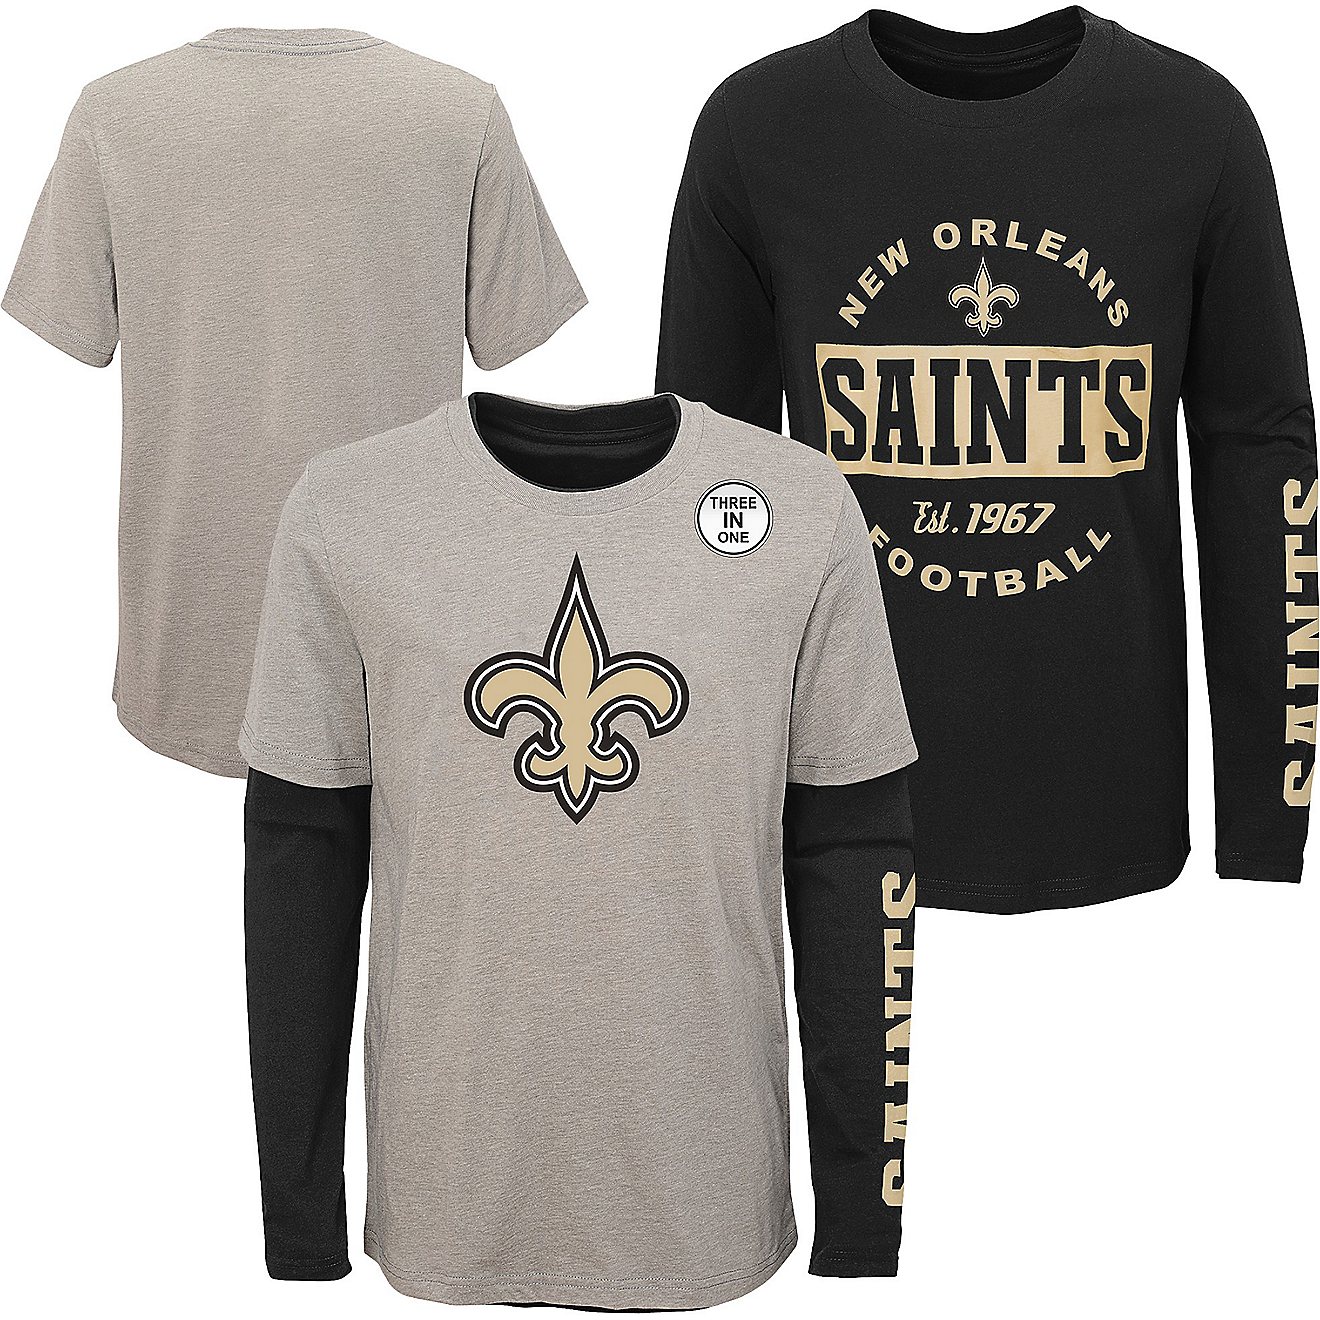 NFL Boys' 4-7 New Orleans Saints Goal Line Stand 3-in-1 T-shirt Combo                                                            - view number 1